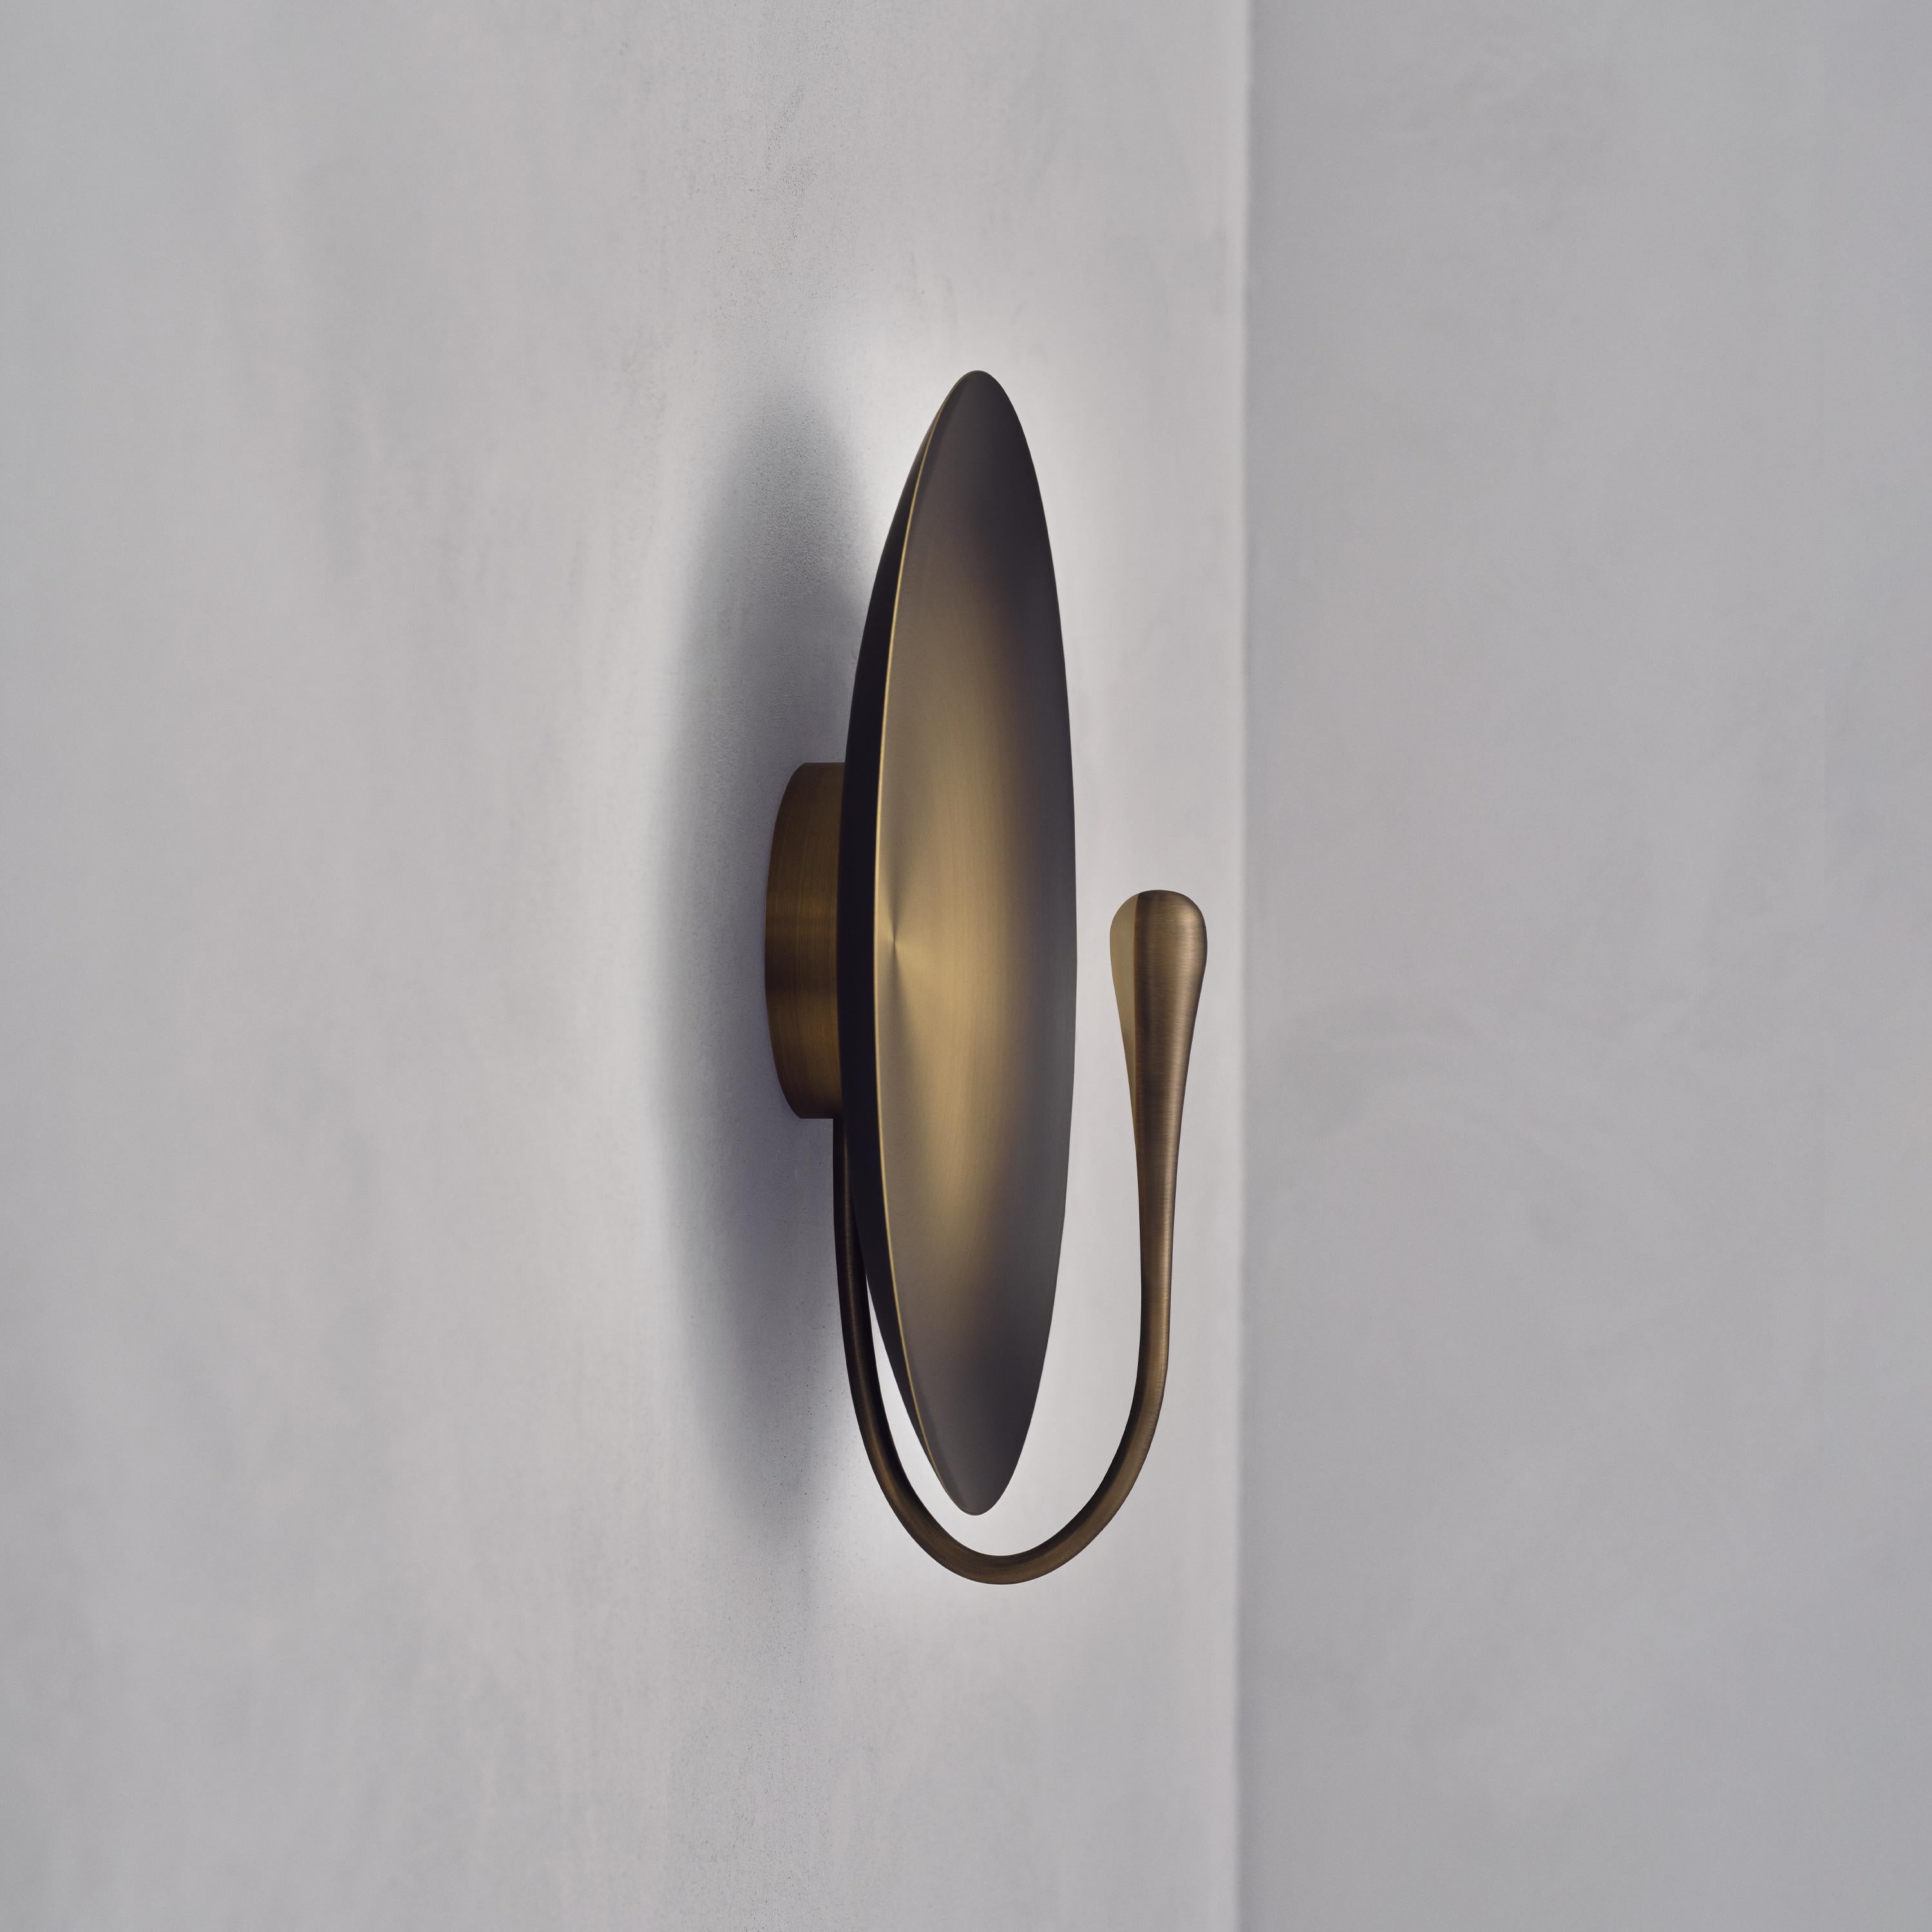 'Cosmic Ore' Gradient Patina Satin Brass Handmade Wall Light, Sconce In New Condition For Sale In London, GB